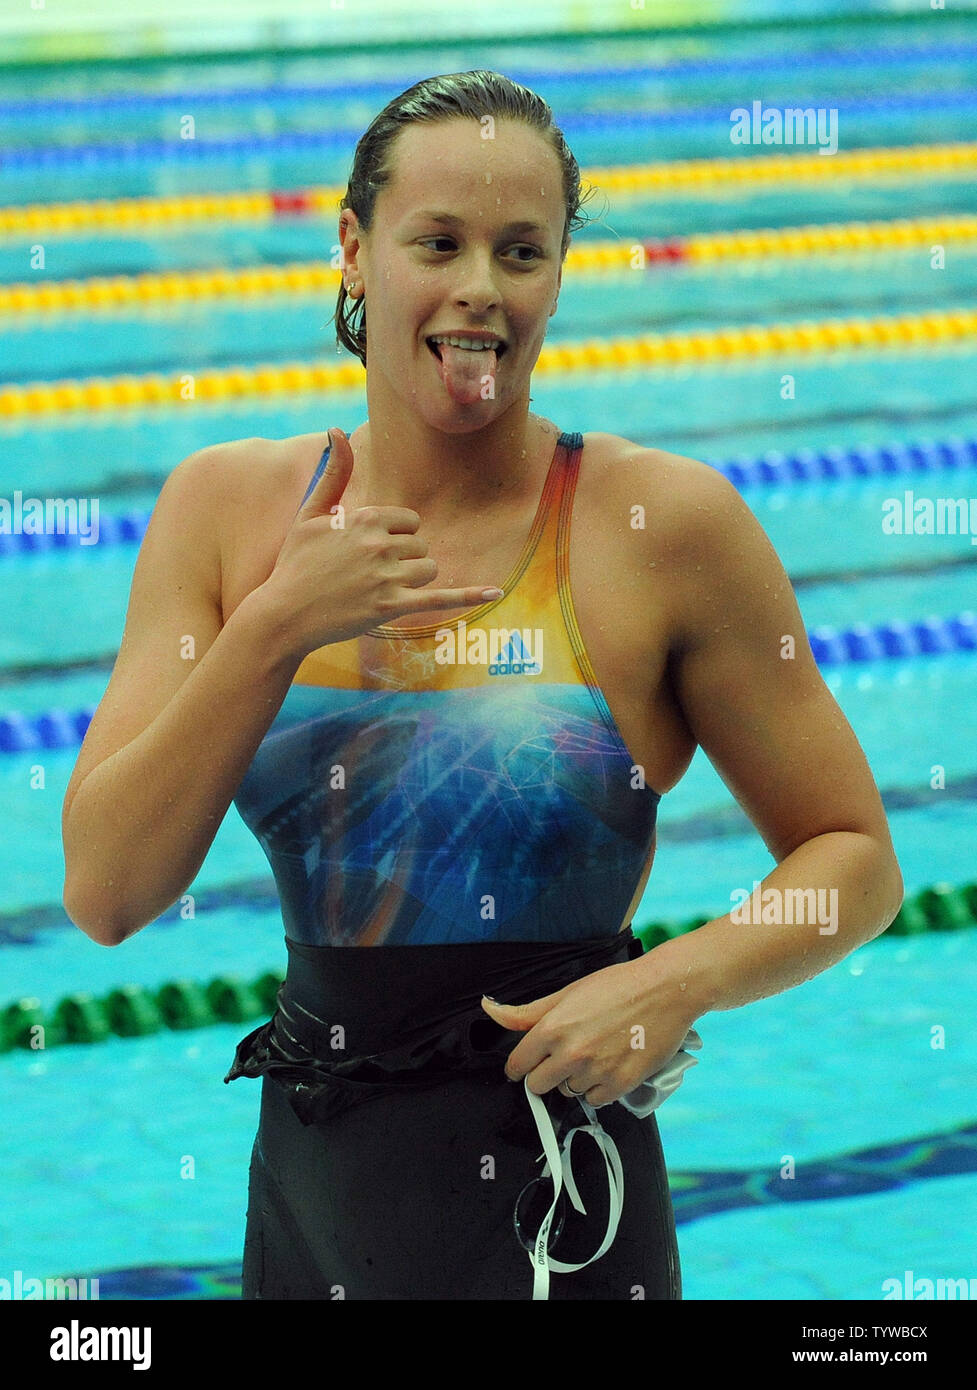 Italy's Federica Pellegrini celebrates her world record time of 1:54.82 in  the Women's 200M Freestyle which earned her gold at the National Aquatic  Center (Water Cube) during the 2008 Summer Olympics in